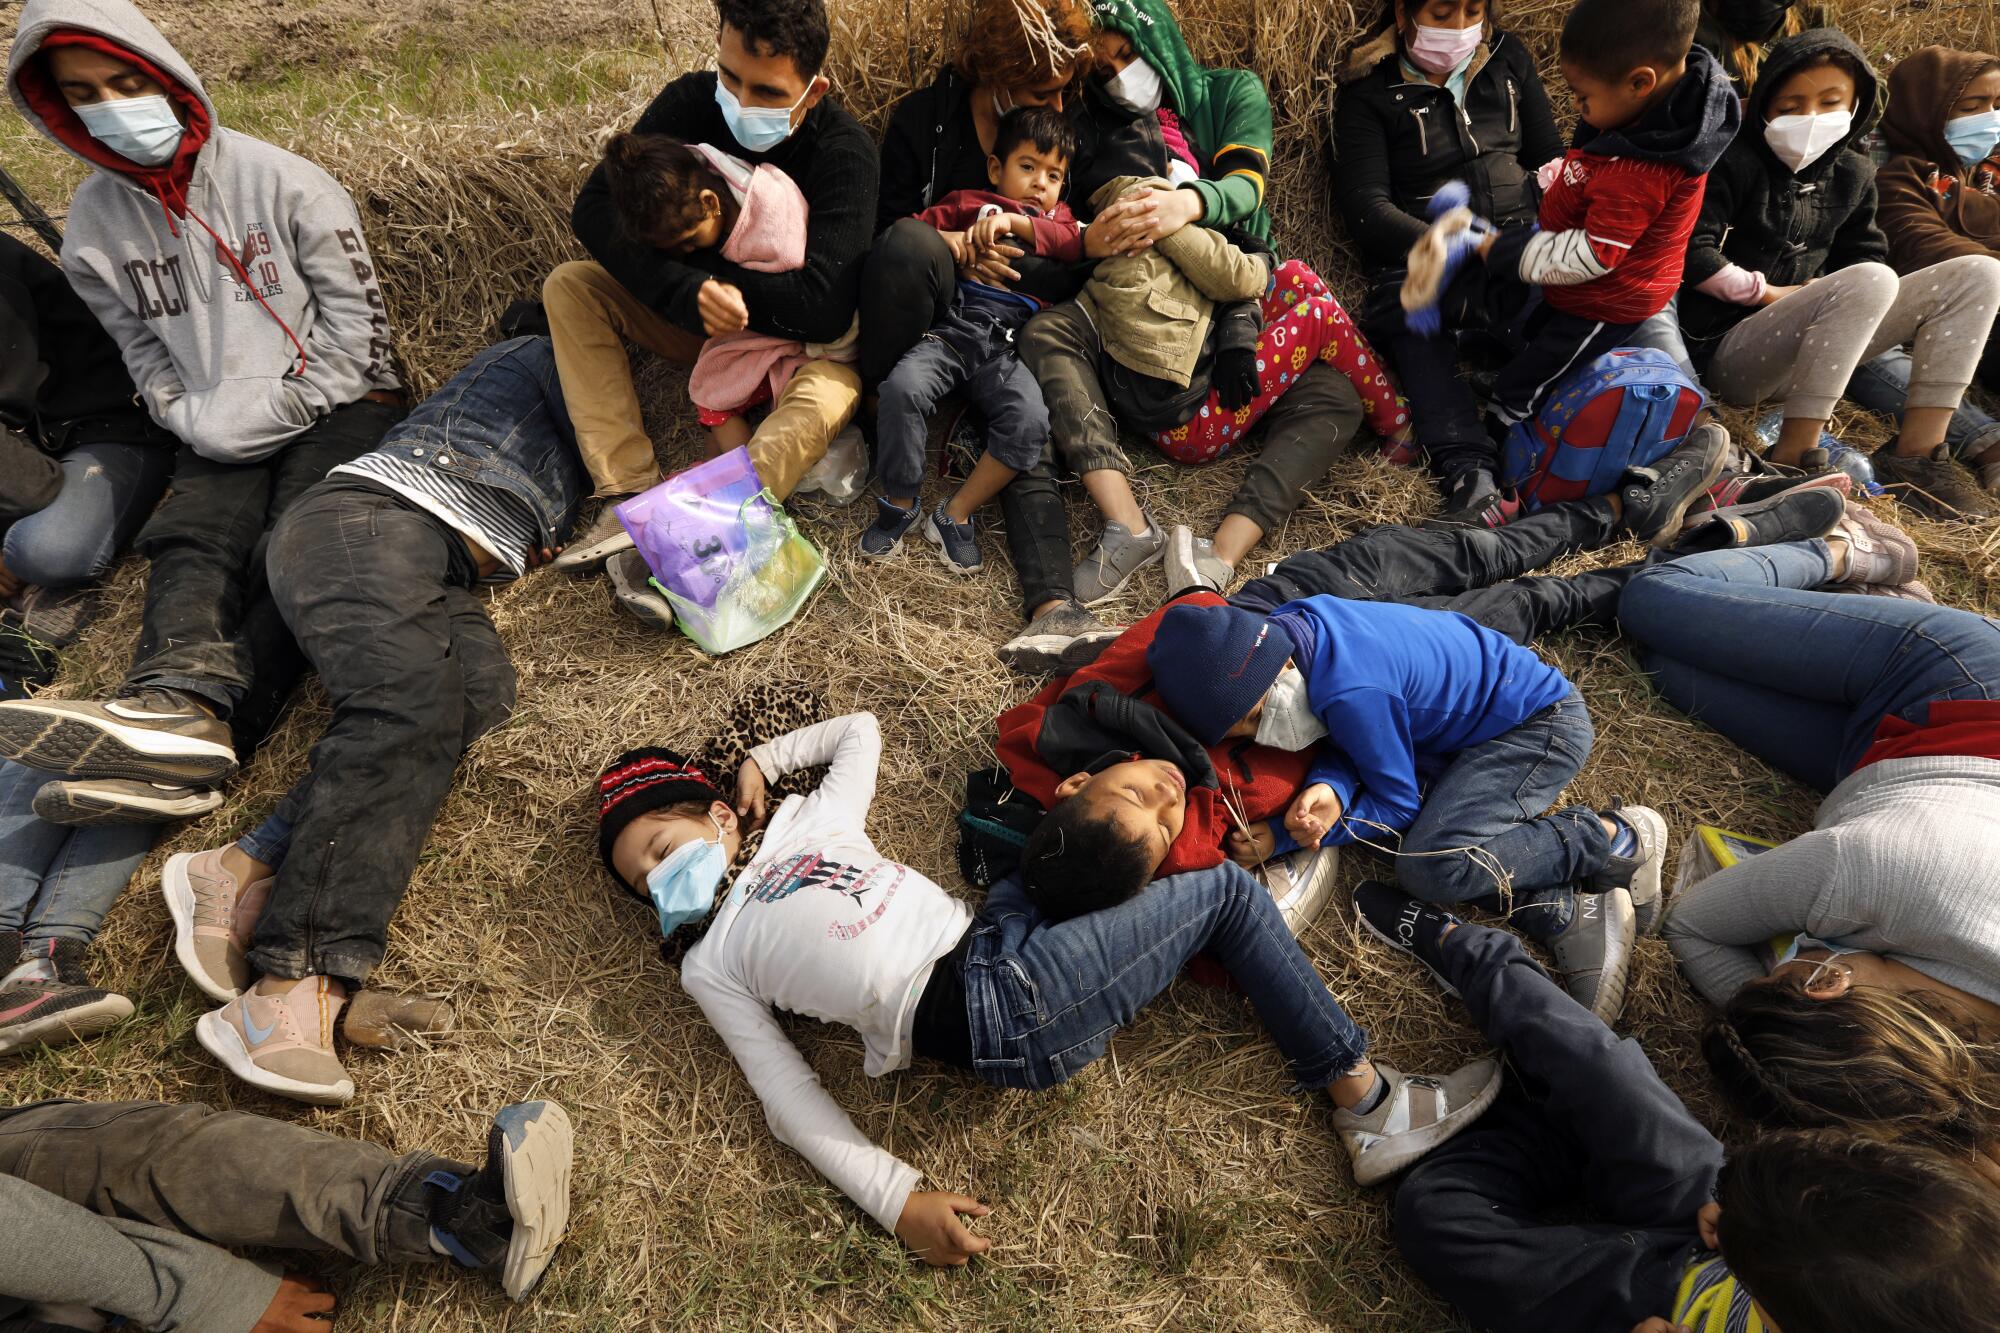 Detained asylum seekers, including children,  sleep on the ground.